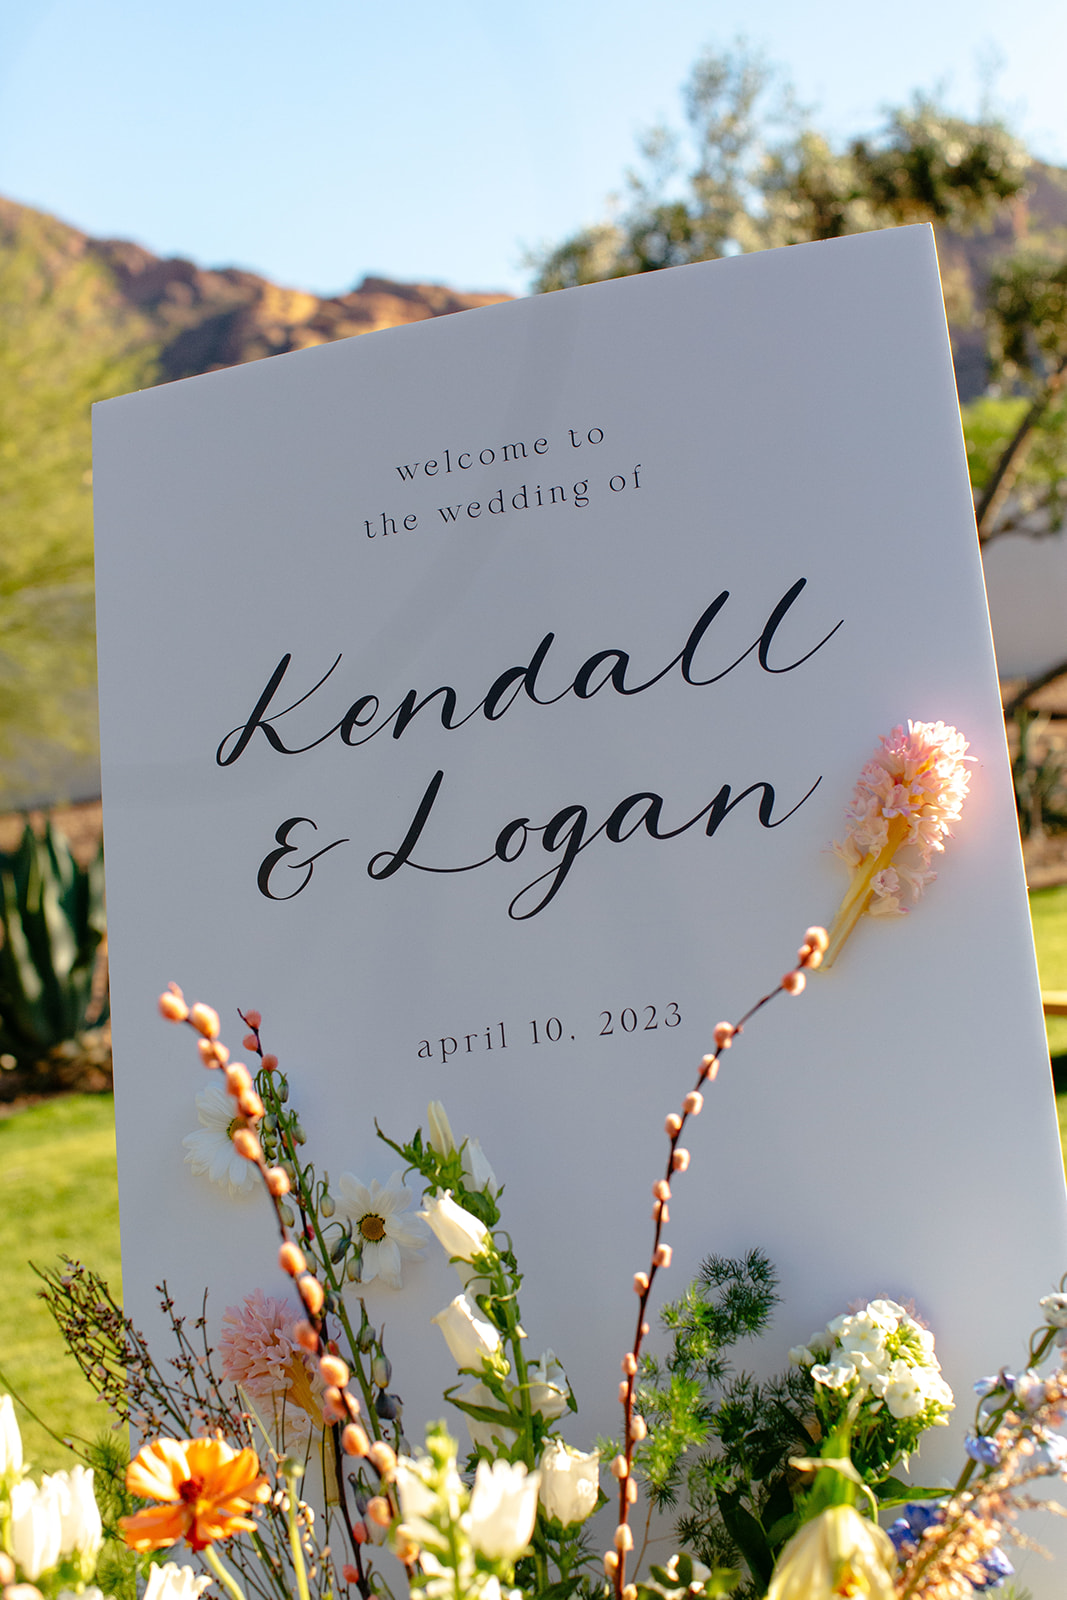 A wedding sign reads "Welcome to the wedding of Kendall & Logan, April 10, 2023" with flowers in the foreground and a mountainous landscape in the background.